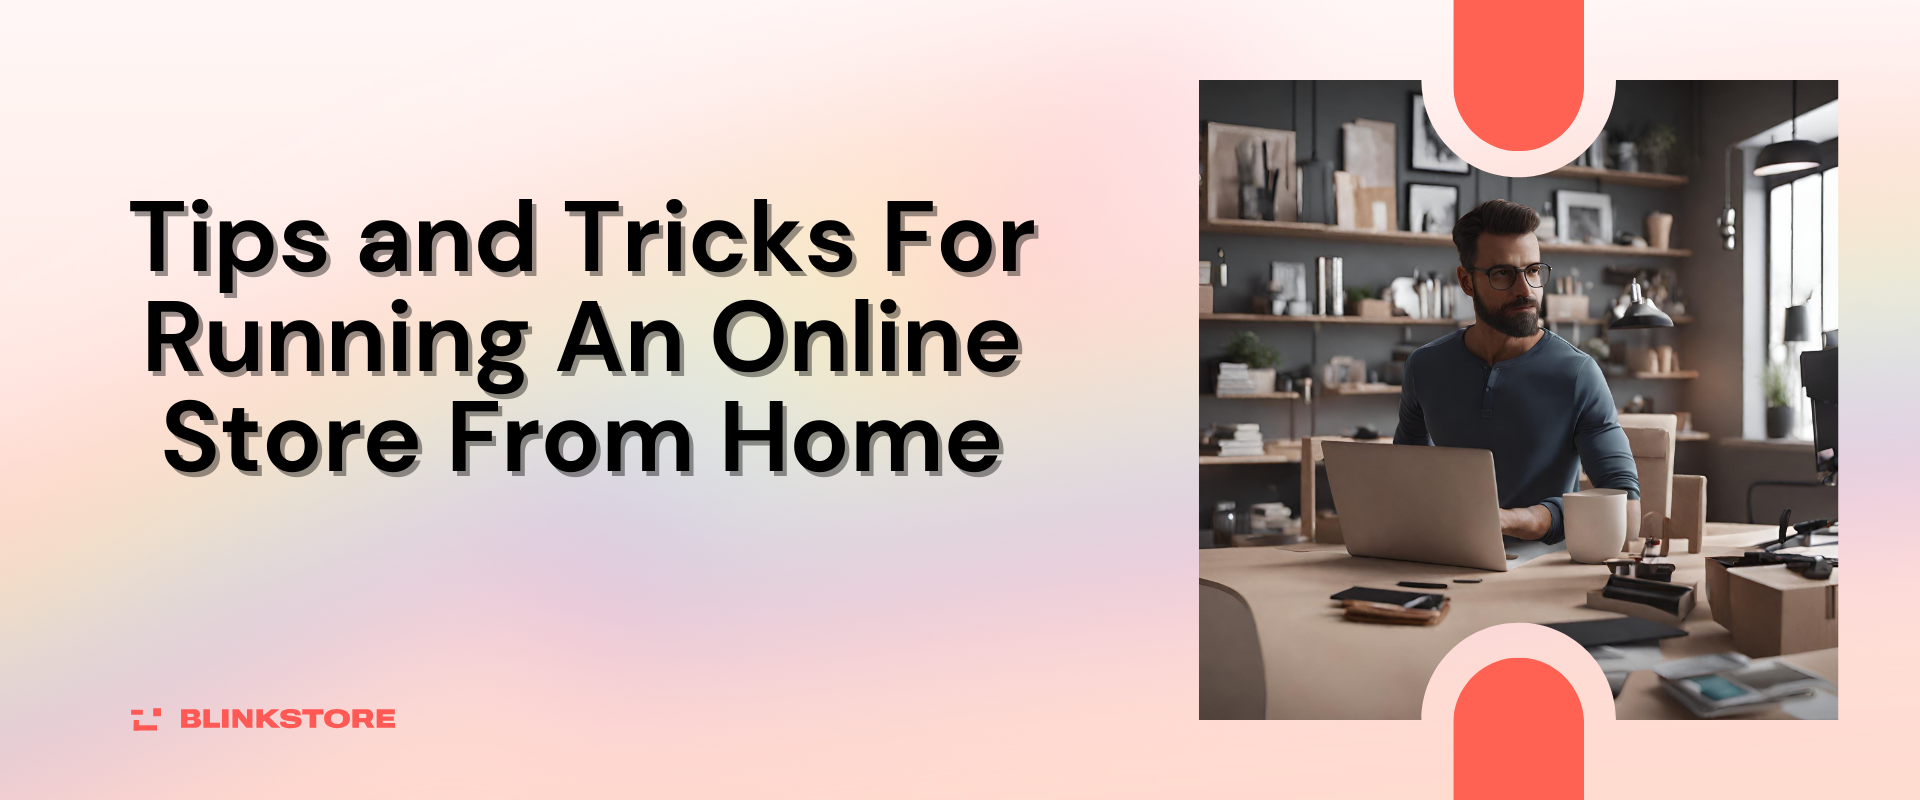 Tips and Tricks For Running An Online Store From Home